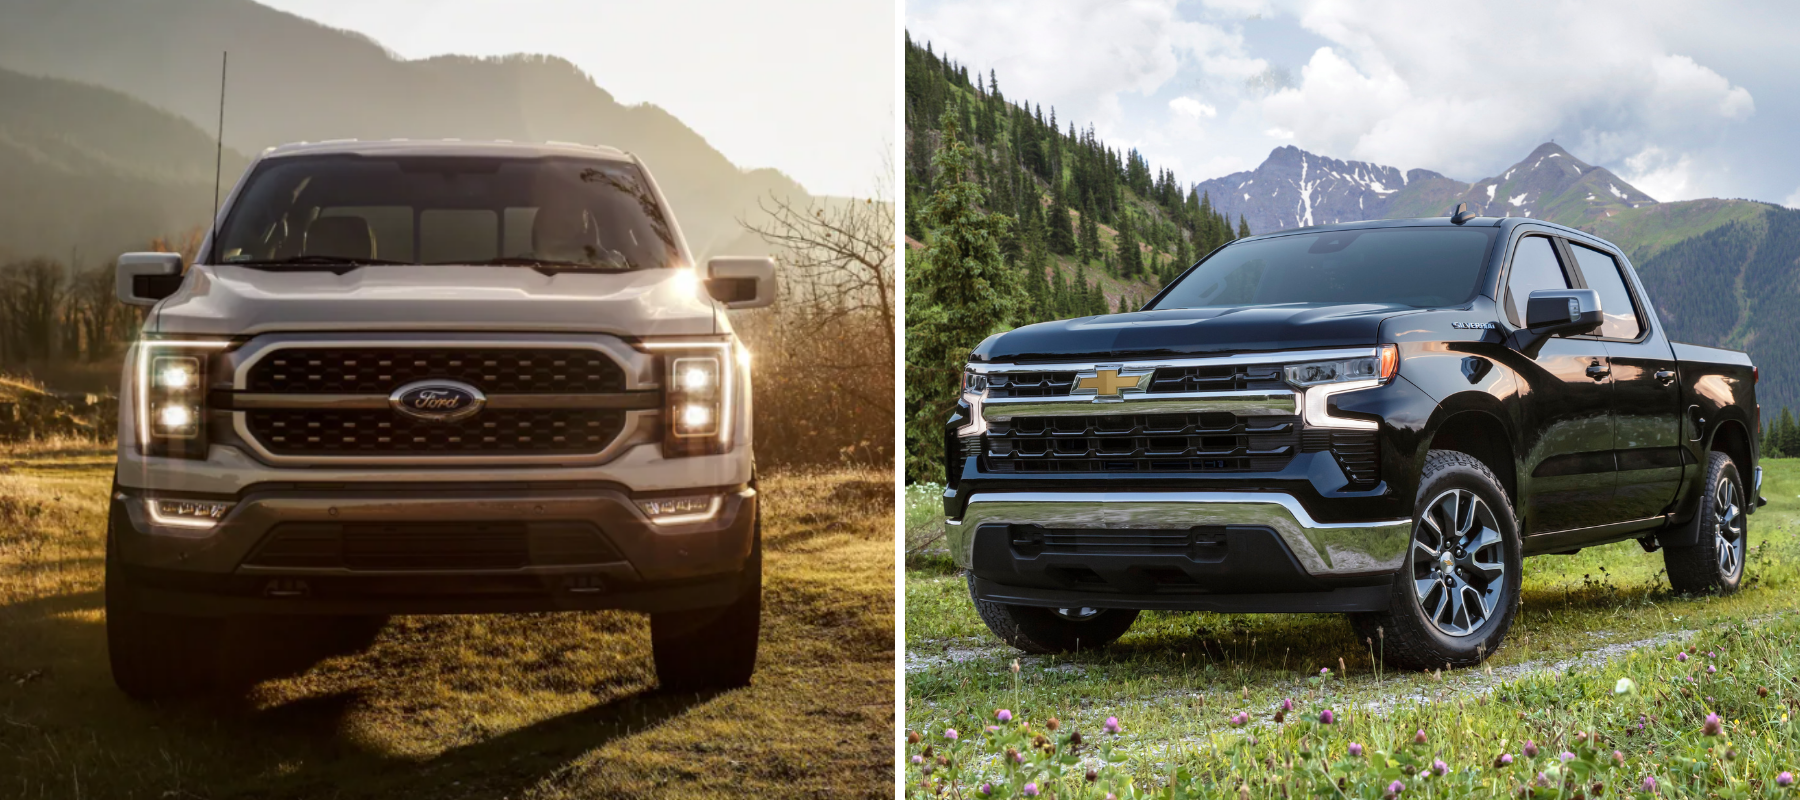 The Ford F-150 King Ranch and Chevrolet Silverado LT full-size pickup trucks